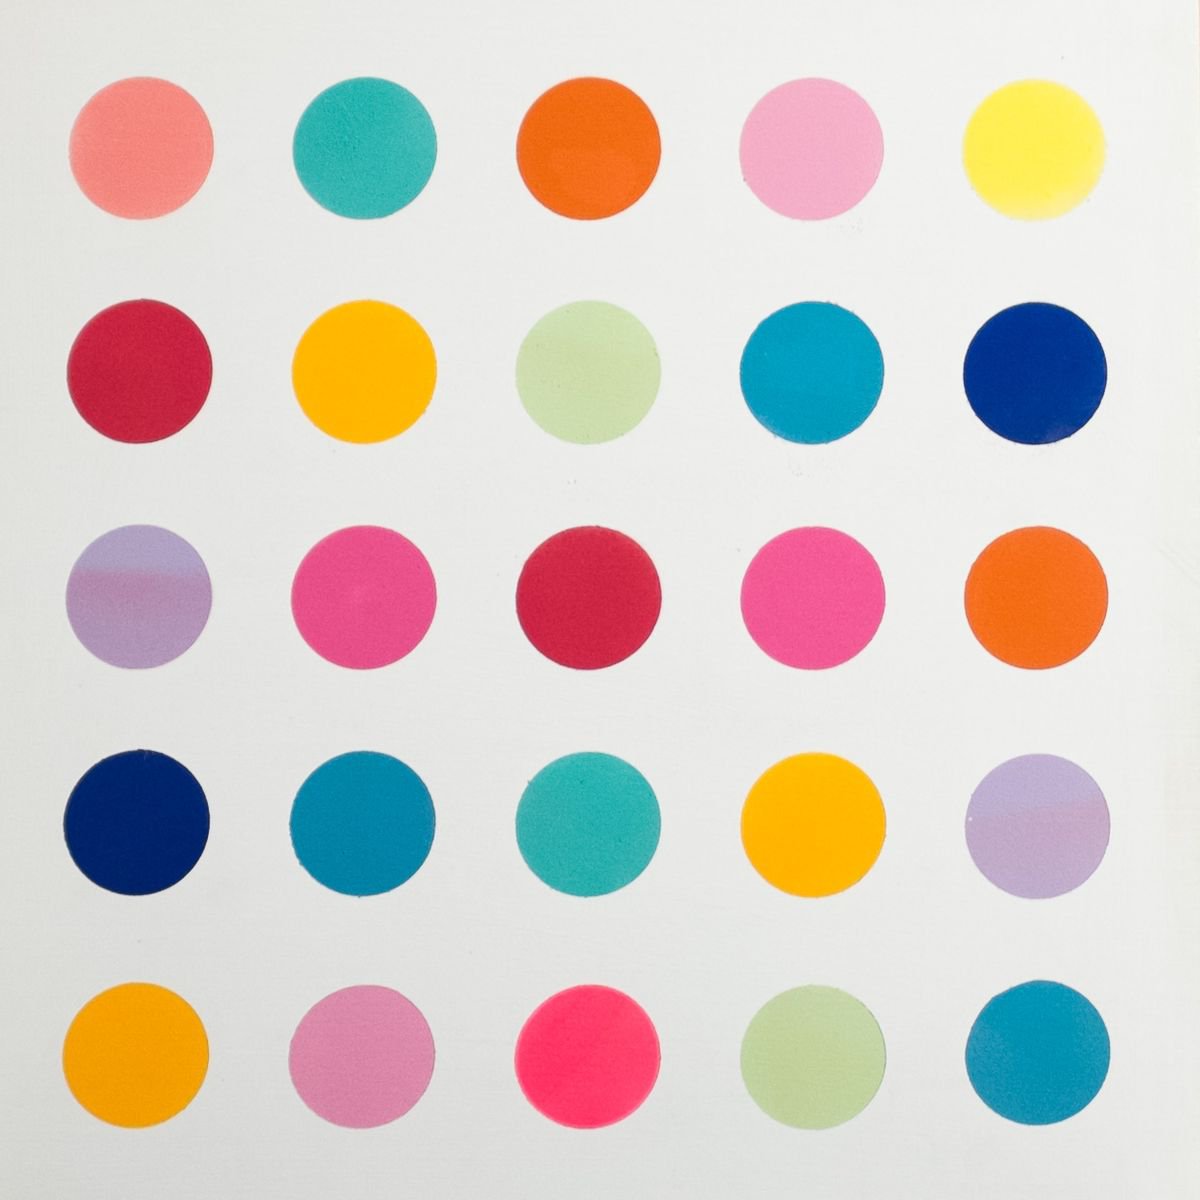 Dots Imperfection I by Dane Shue